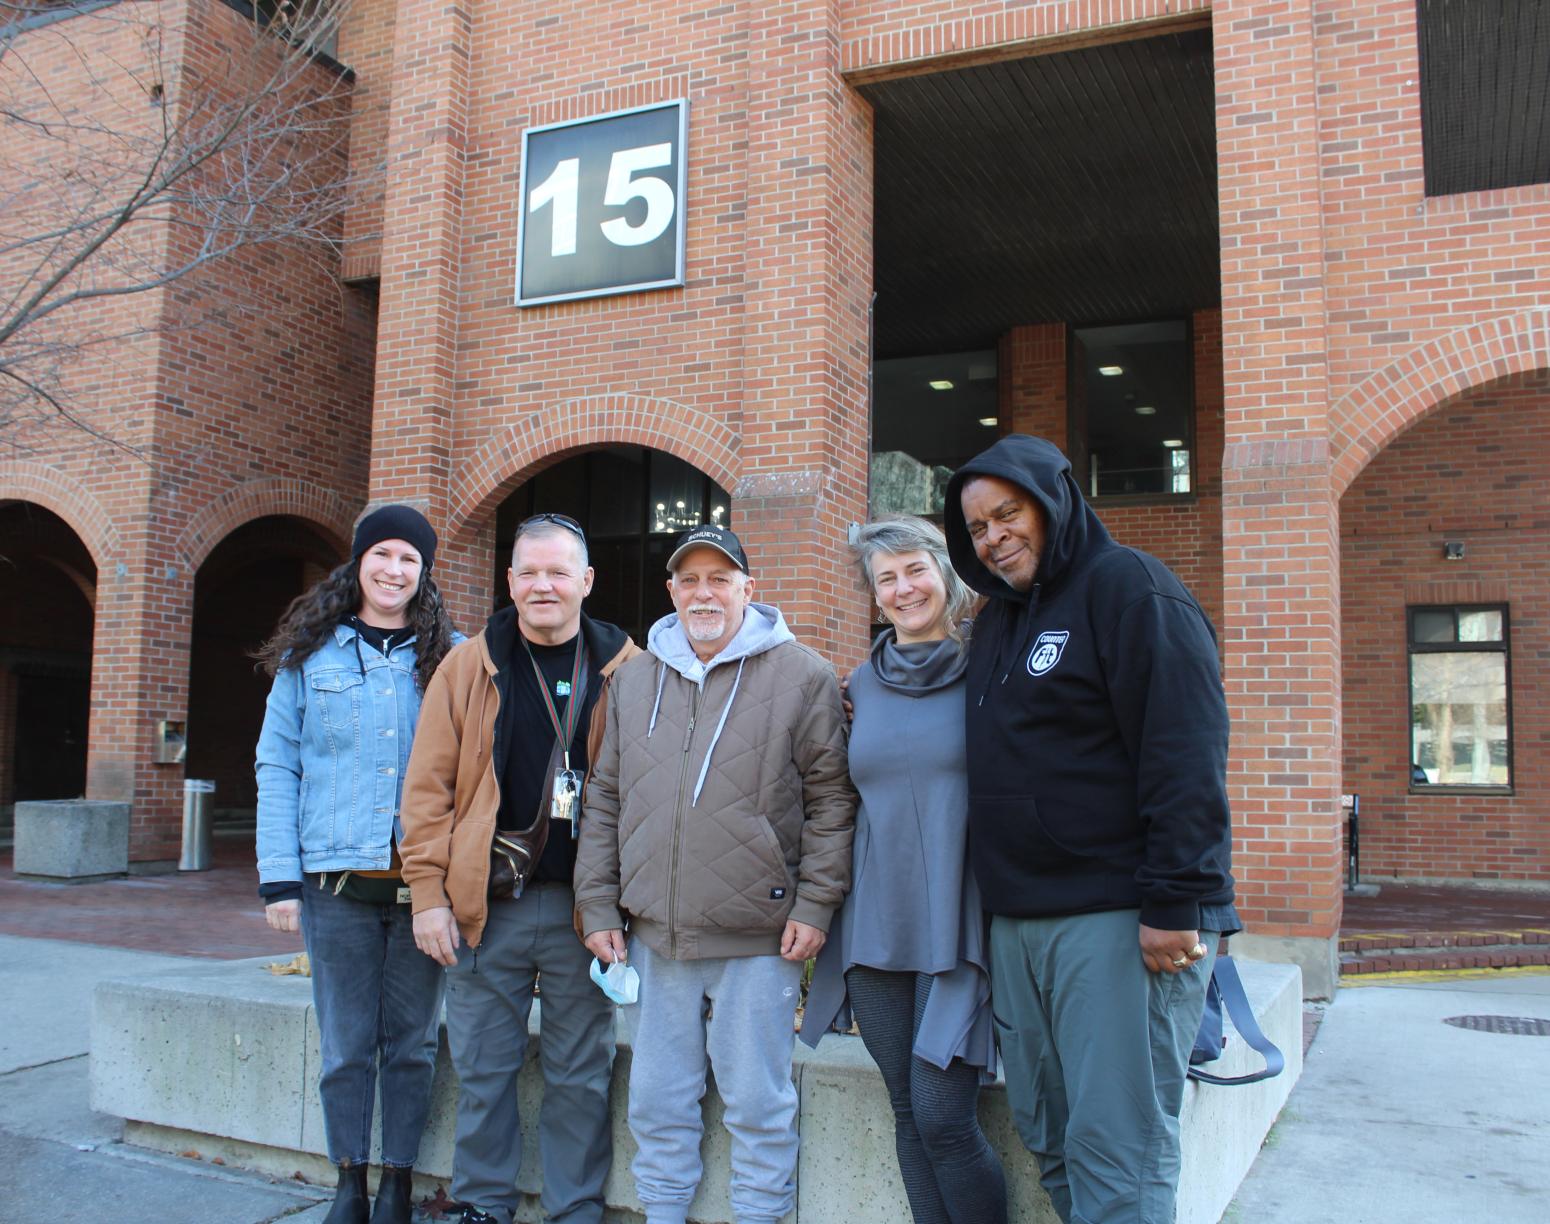 Group shot of five people standing outside a building